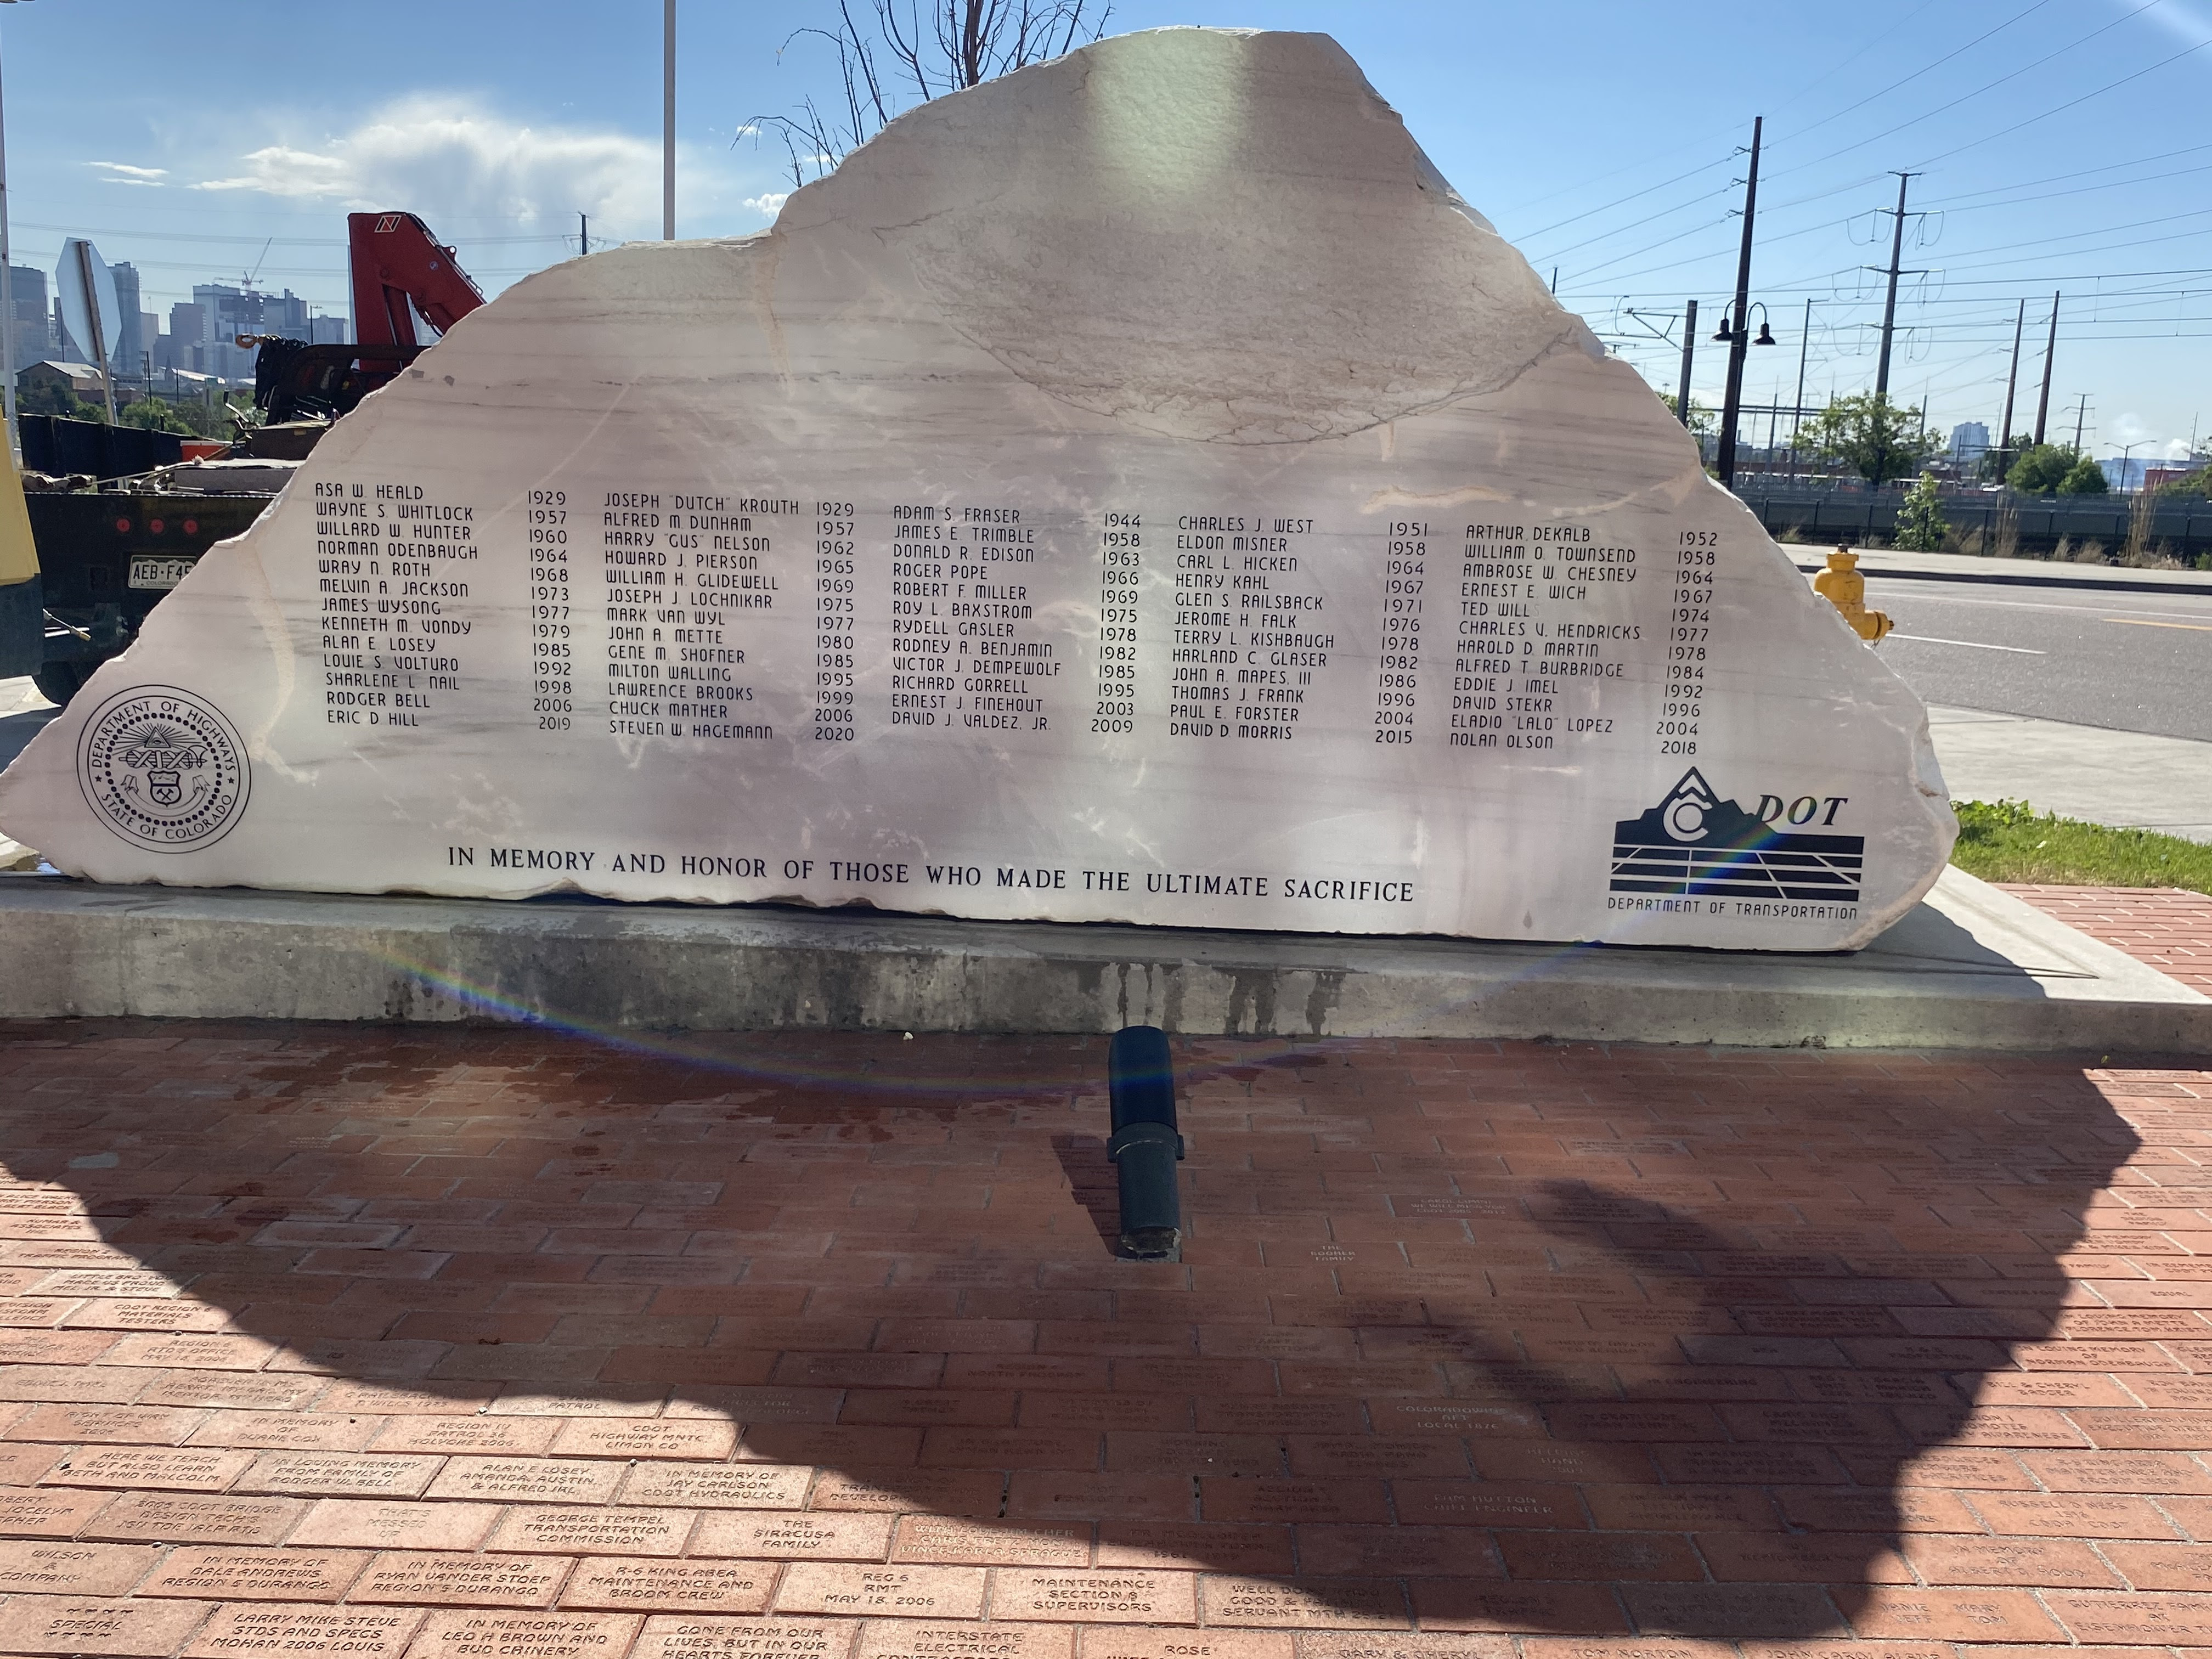 CDOT pays tribute to the 62 employees lost in the line of duty by having the names of their fallen colleagues etched onto the marble memorial outside its Denver headquarters.jpg detail image